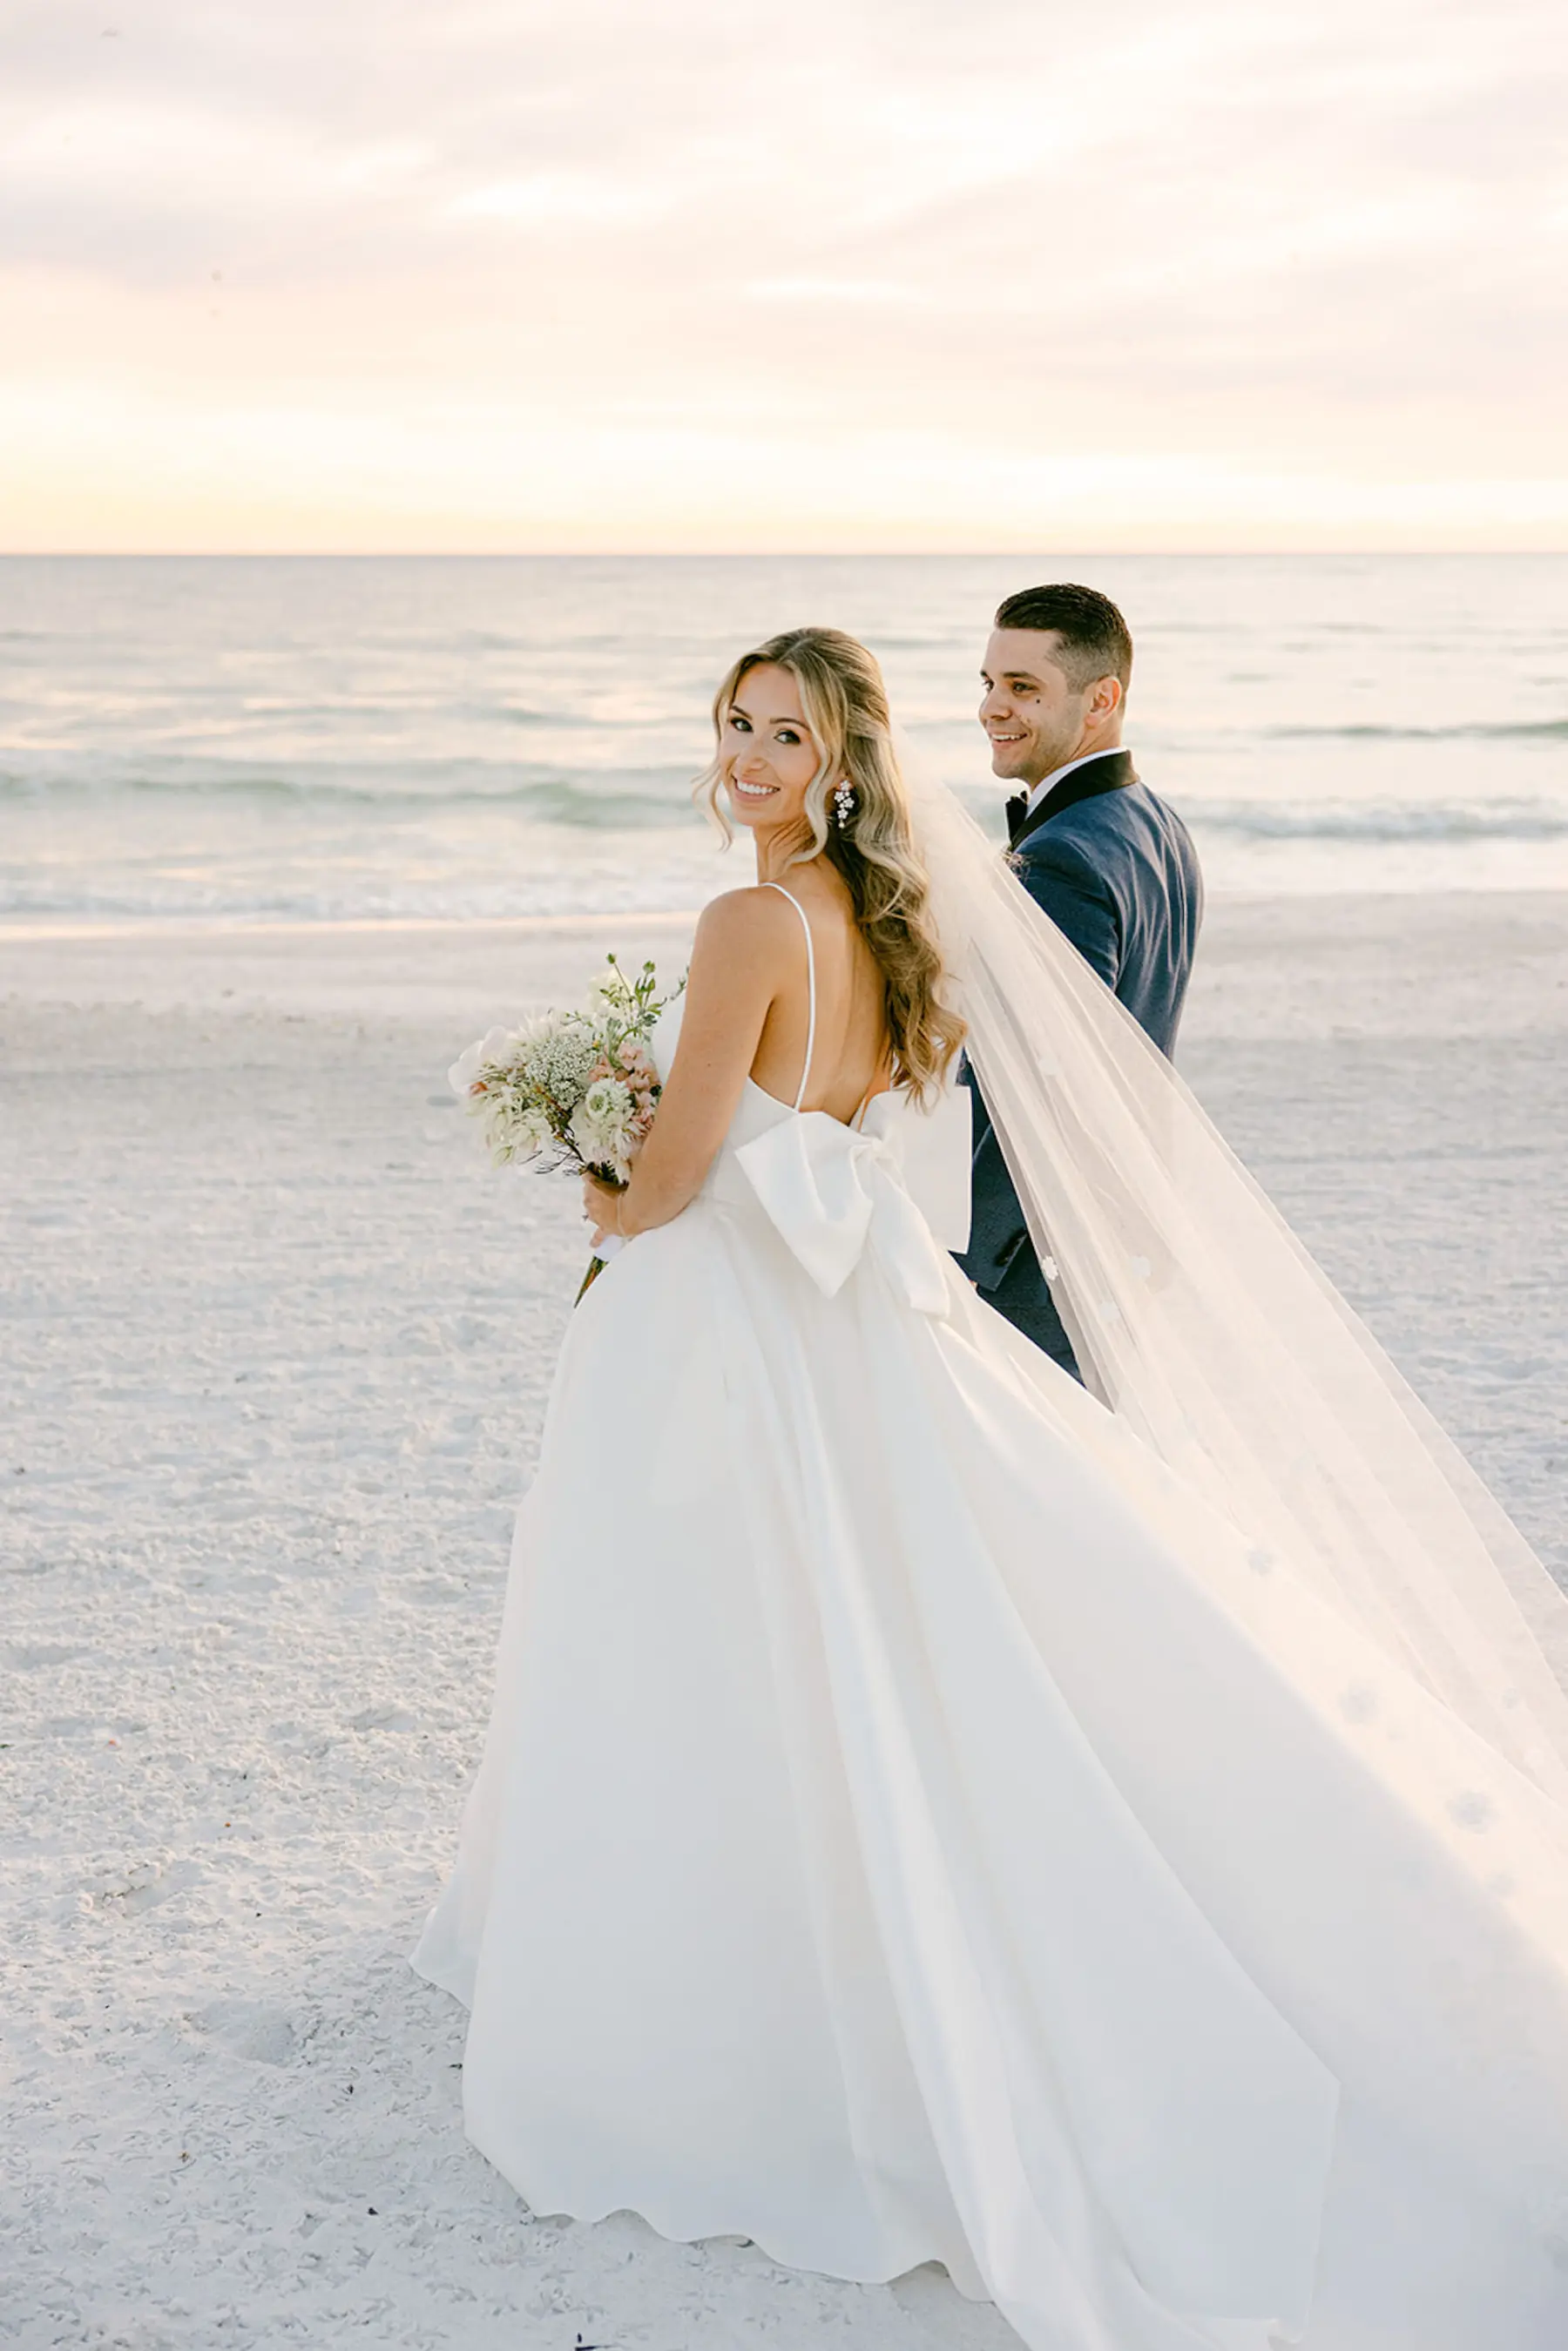 White A Line Martina Liana Beach Wedding Dress with Bow Ideas | Bridal Half Up Half Down Hair and Natural Makeup Inspiration | Sarasota Waterfront Beach Venue The Resort at Longboat Key Club | Planner Elegant Affairs by Design